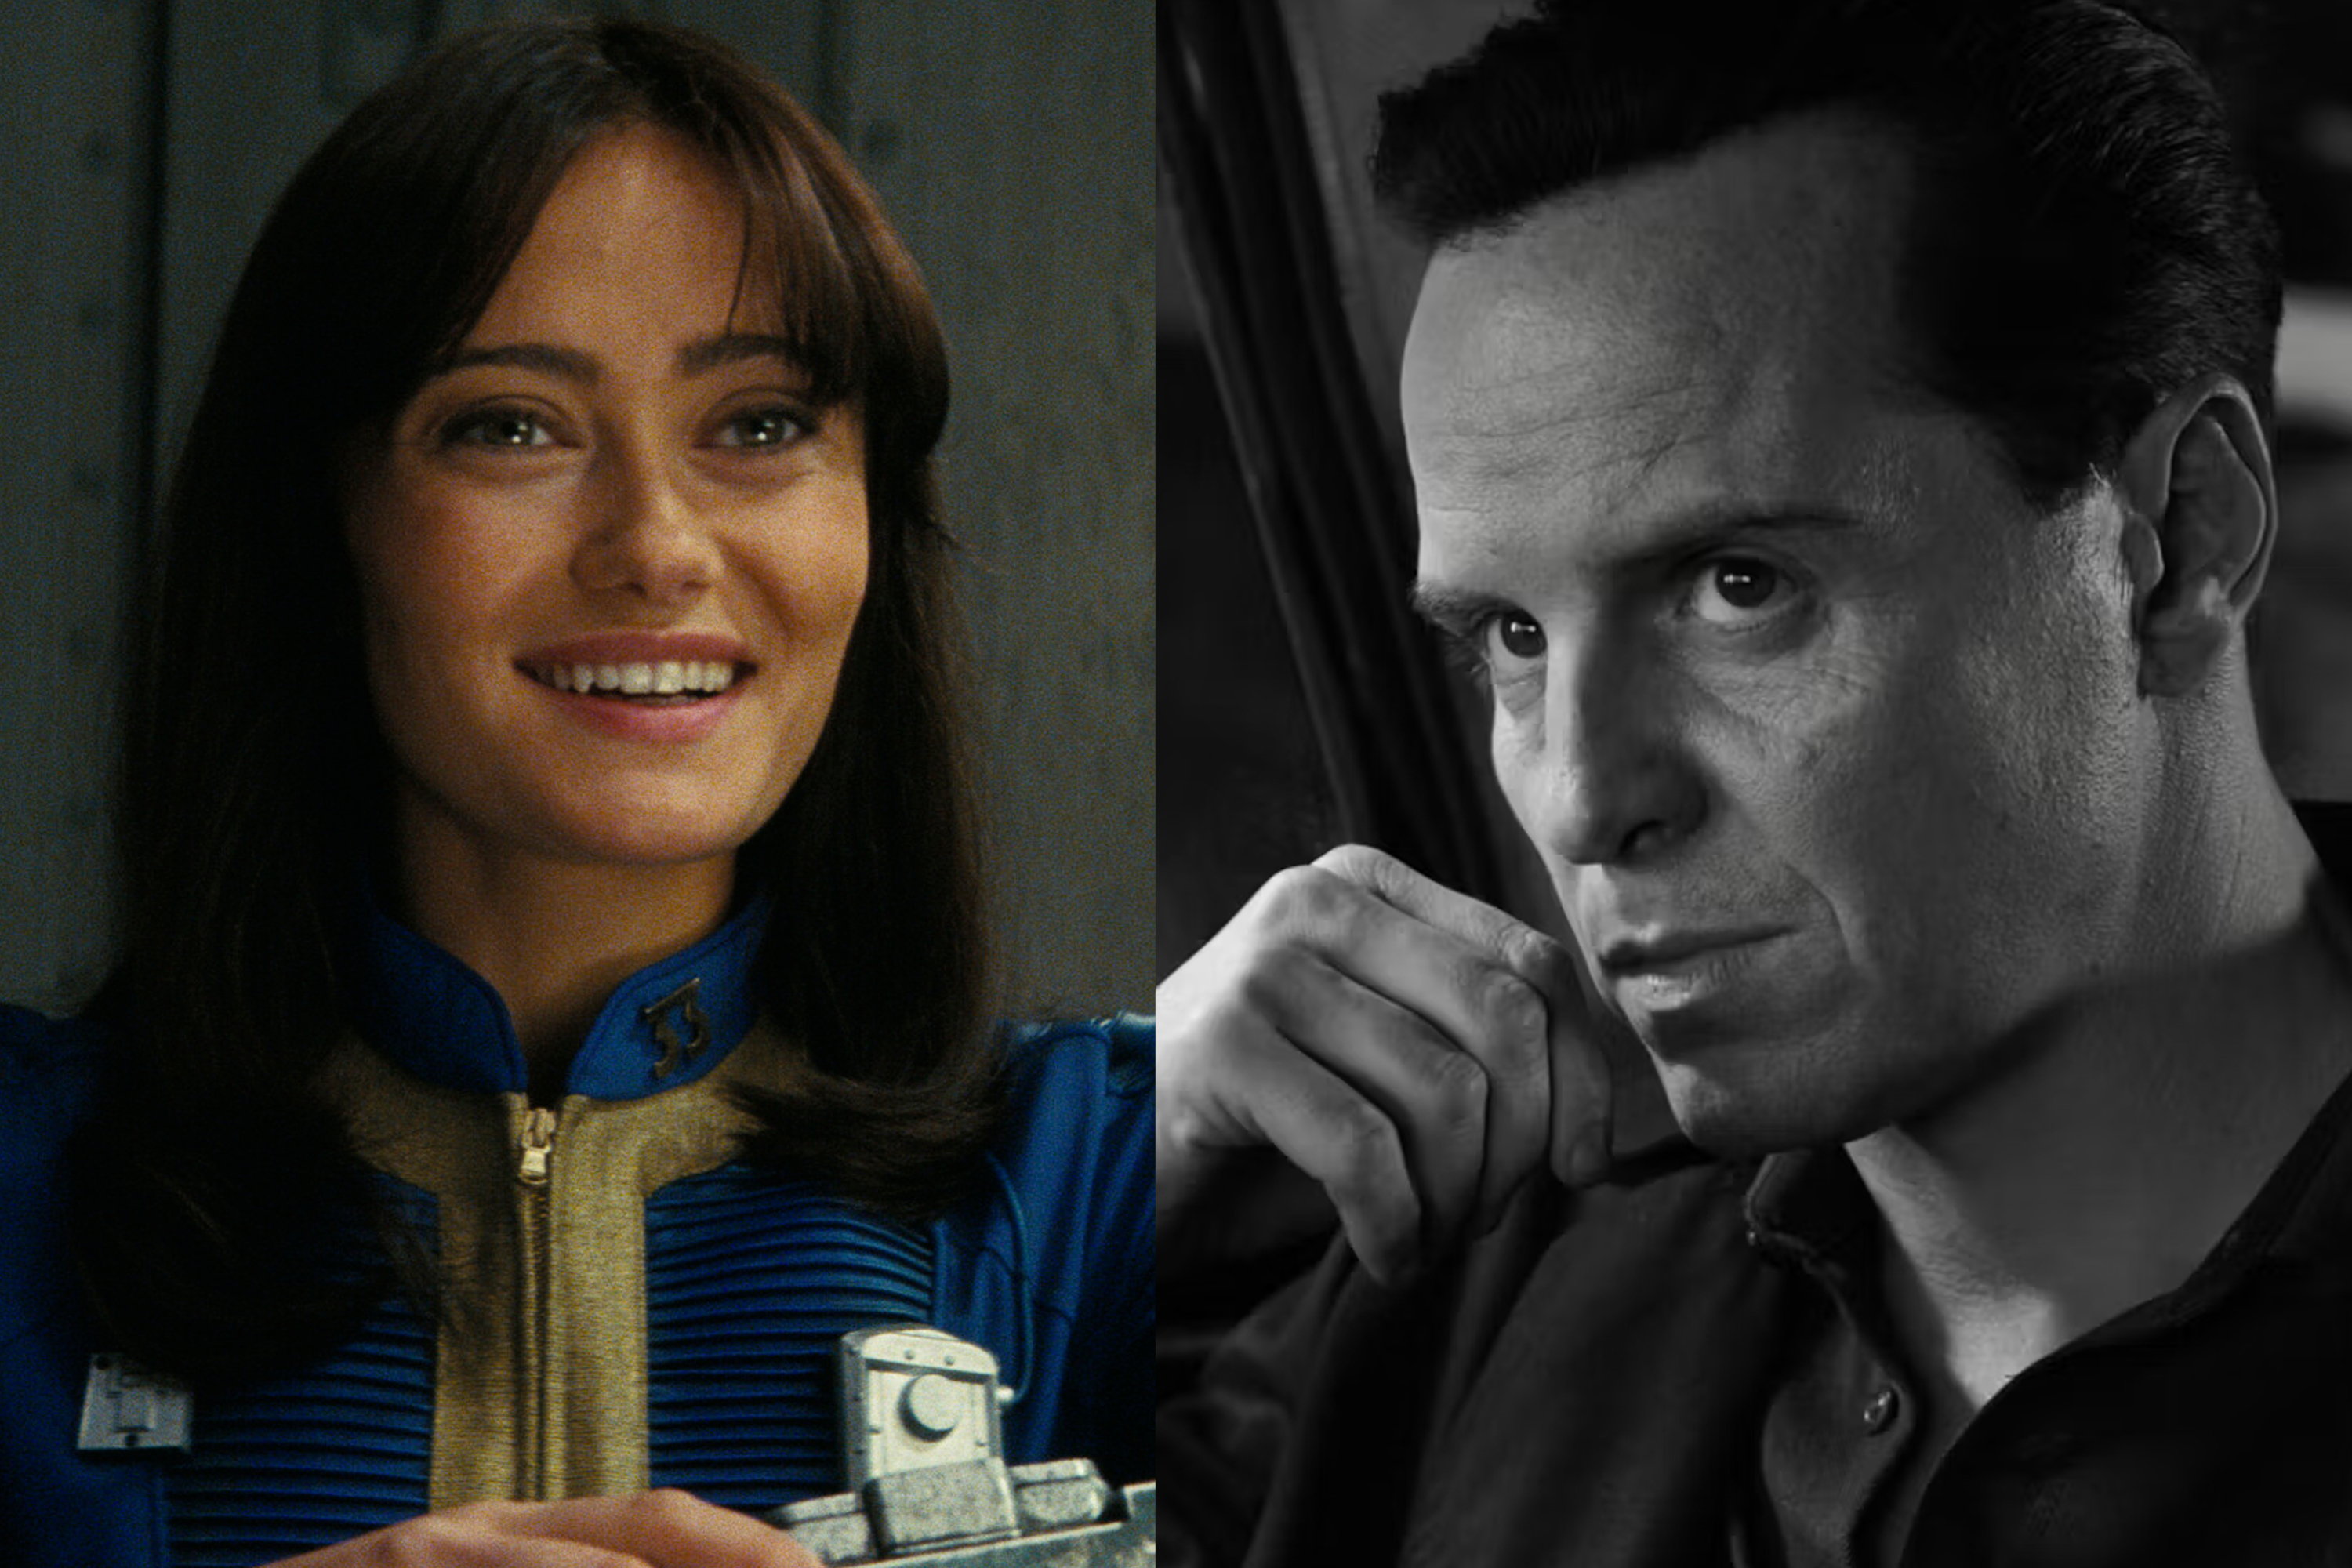 Lucy Maclean smiles in Fallout and Tom Ripley looks up in Ripley.